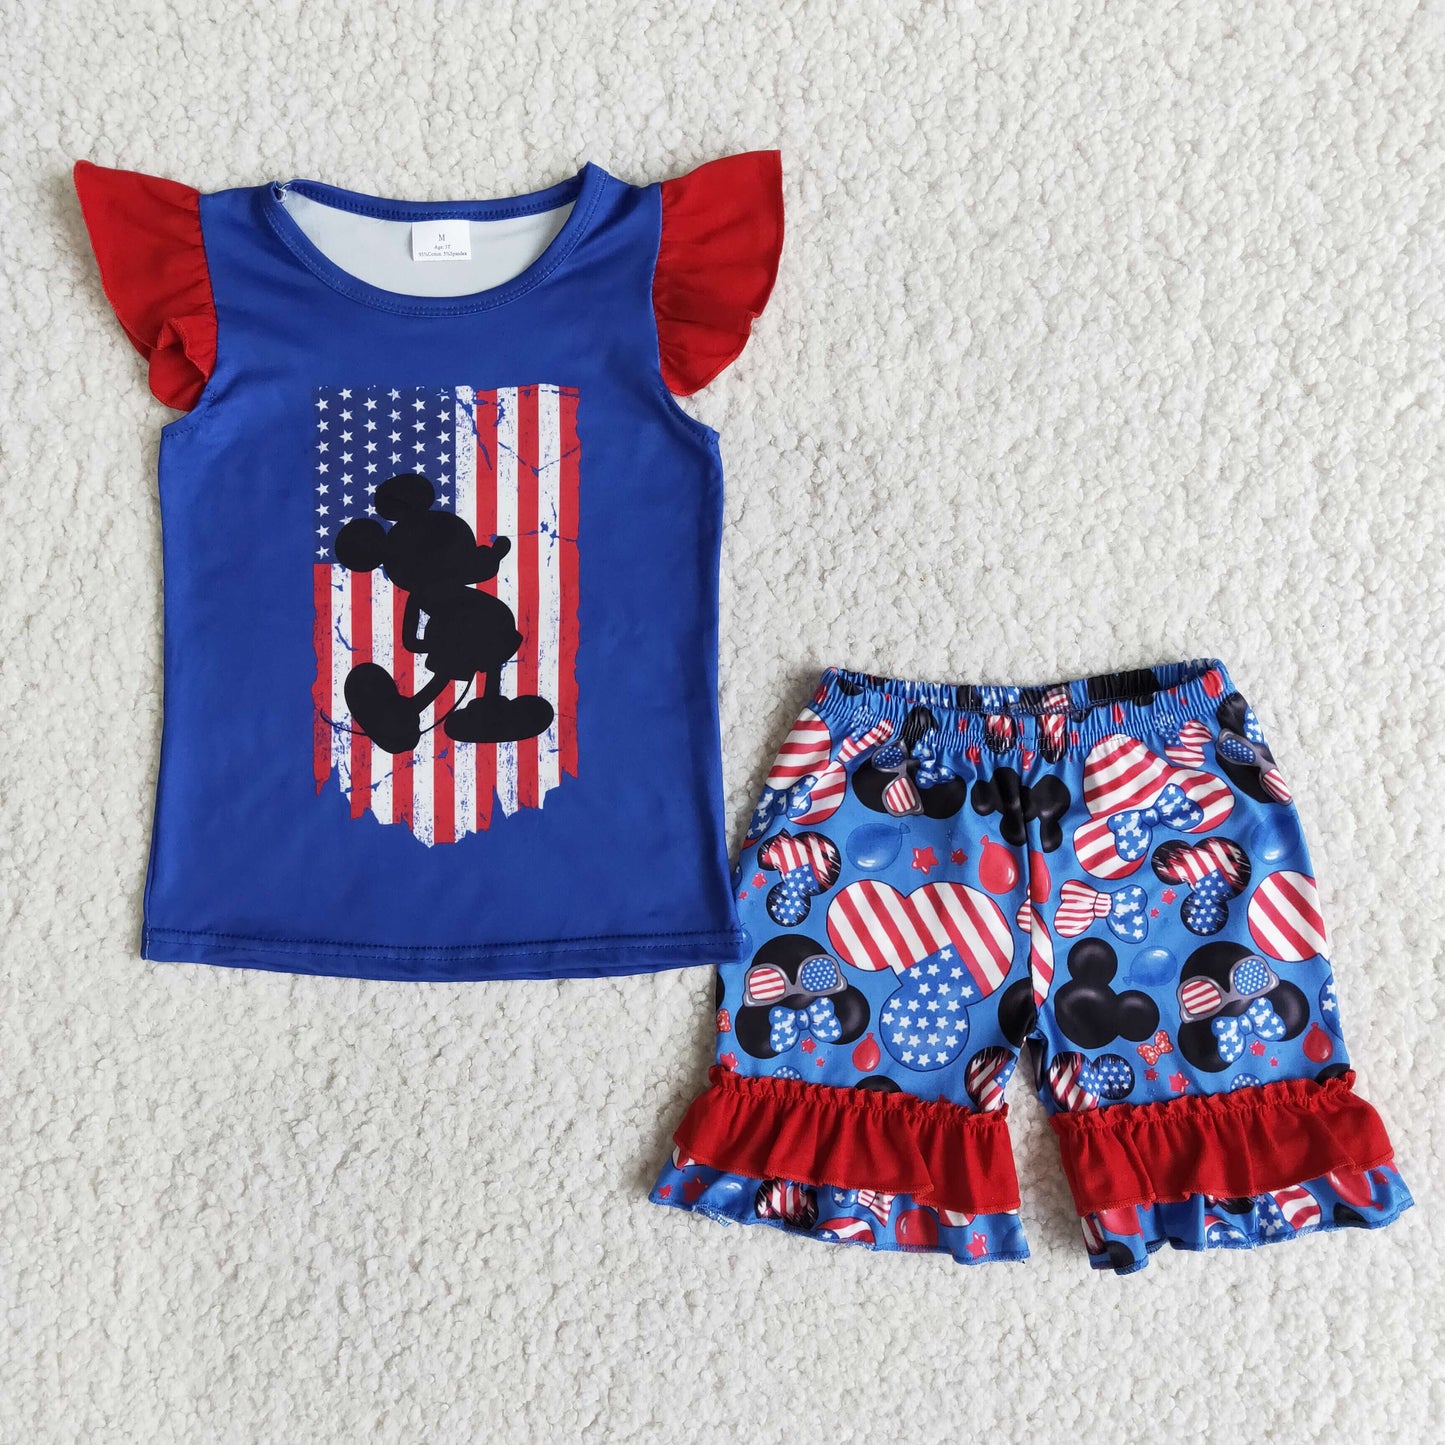 Flutter sleeve mouse shirt ruffle pants kids girls 4th of july outfits